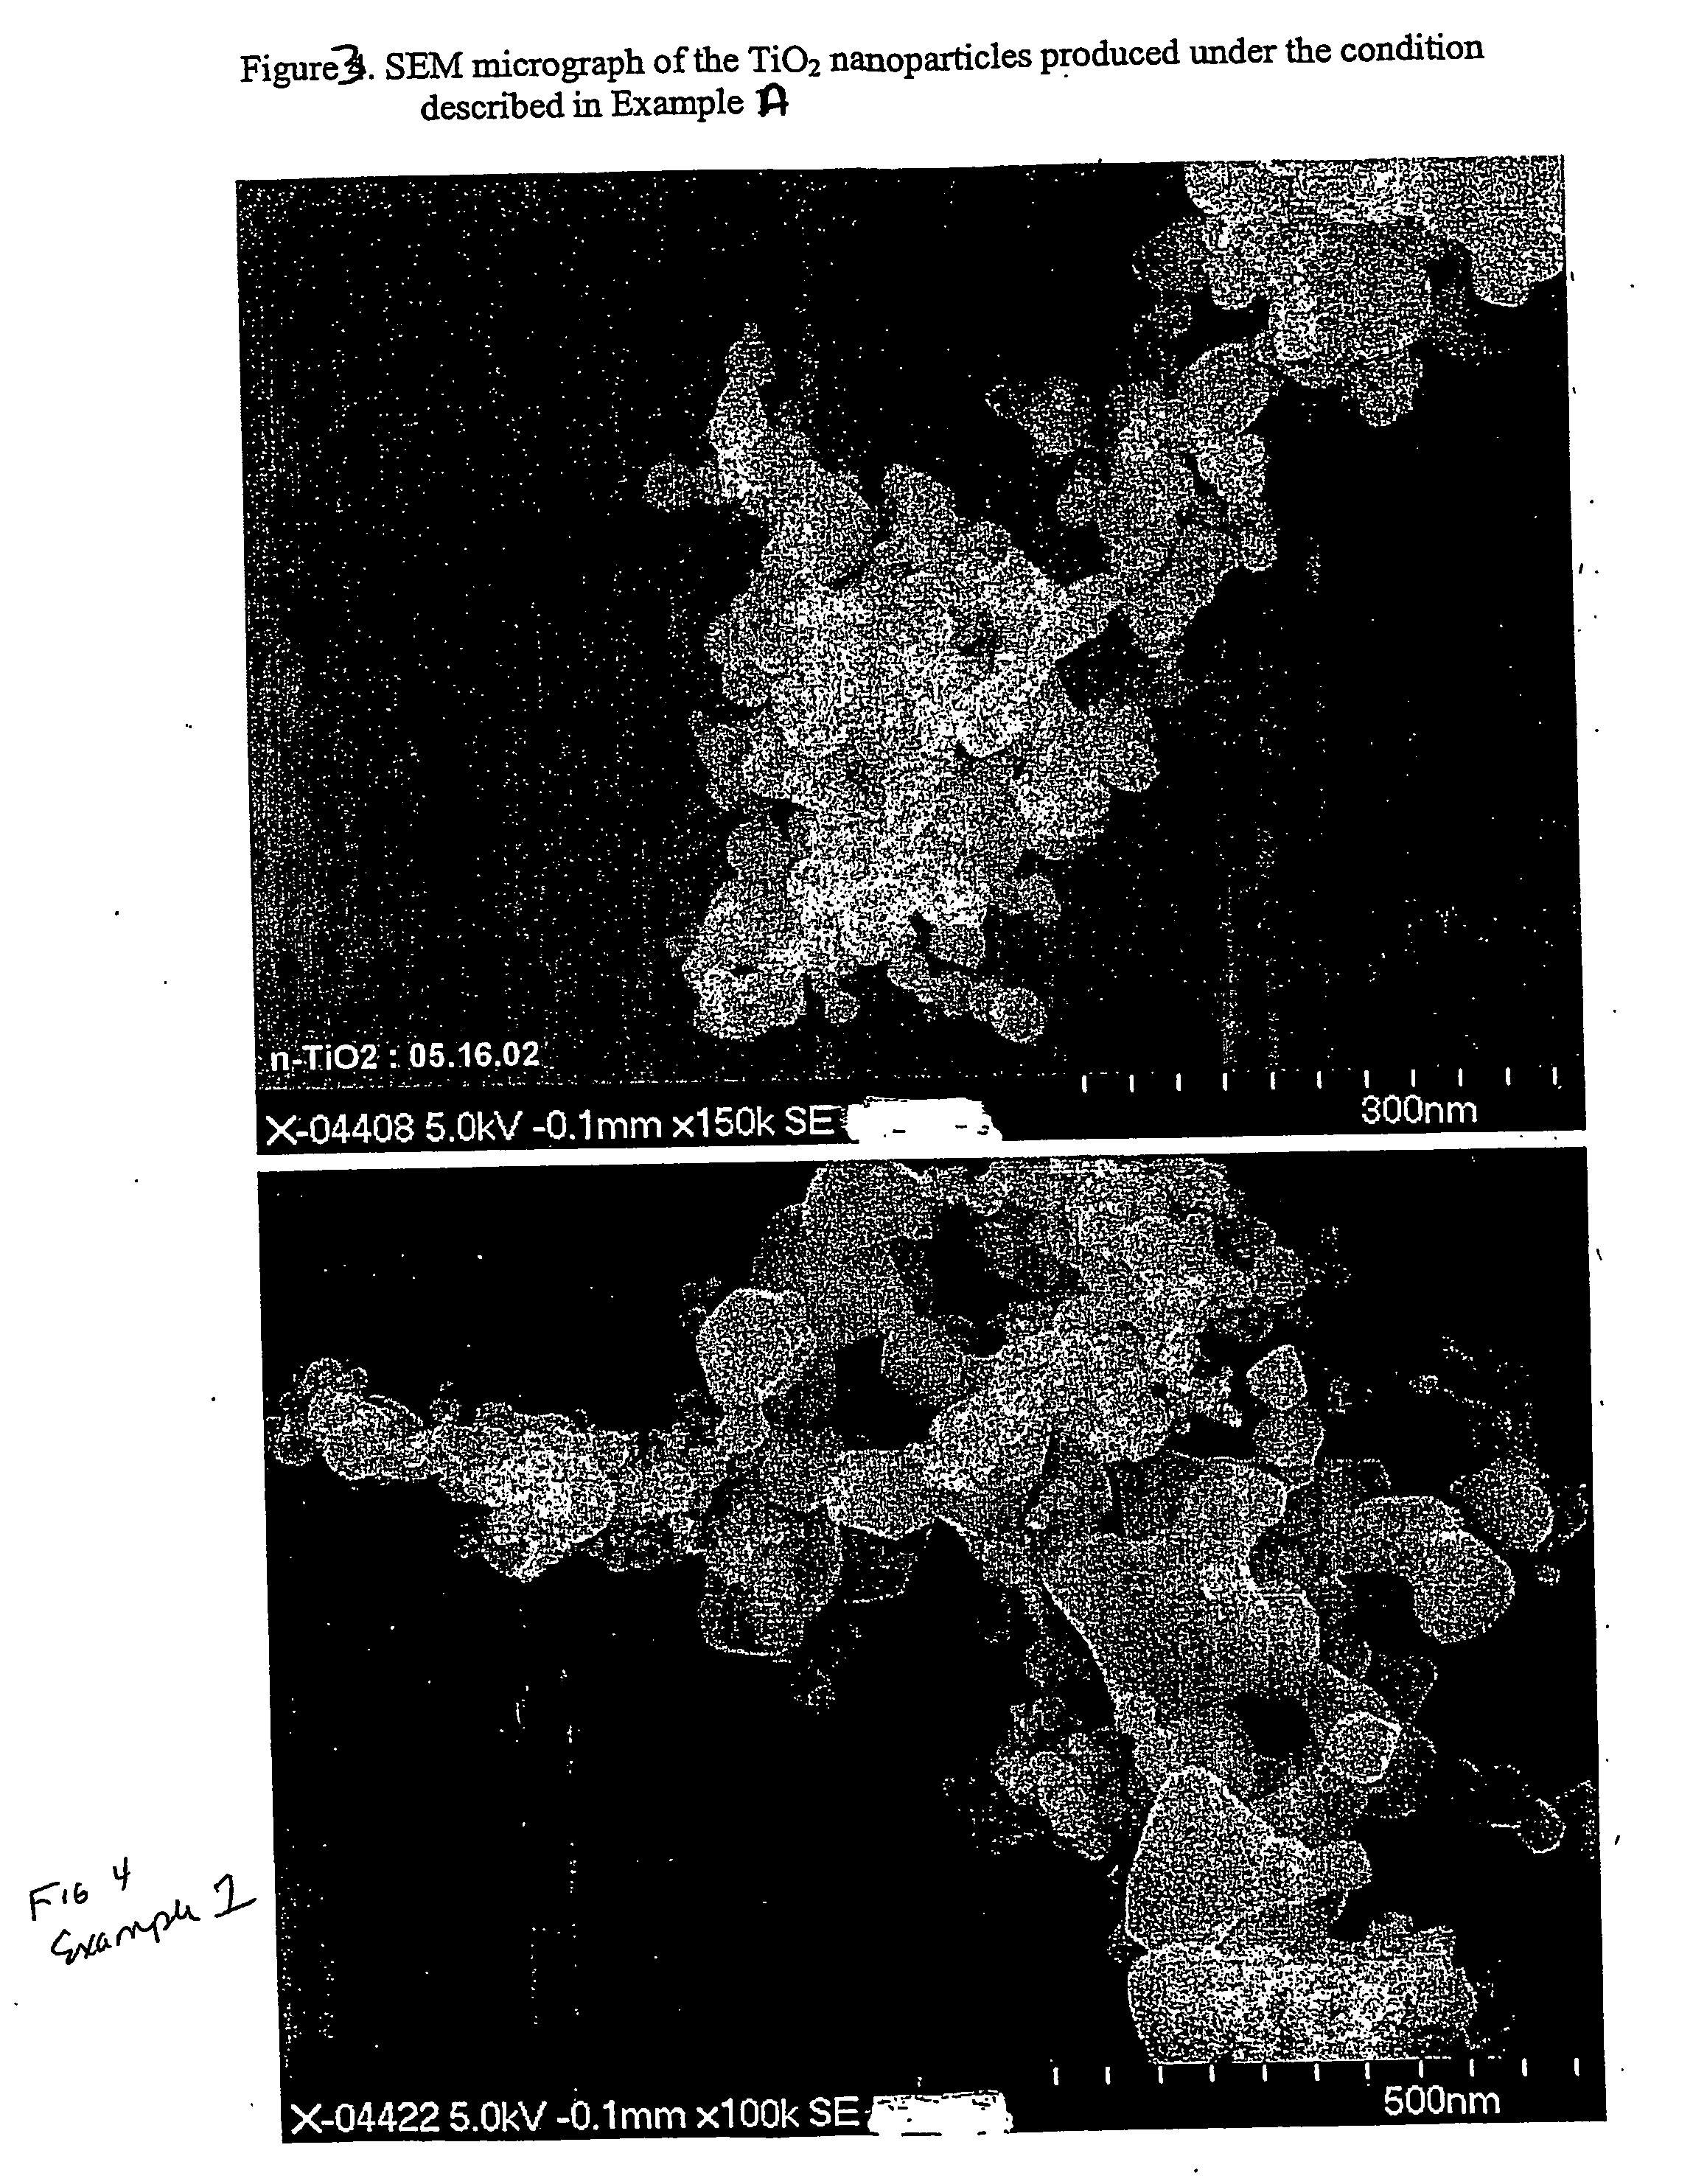 Method of producing nanoparticles using a evaporation-condensation process with a reaction chamber plasma reactor system